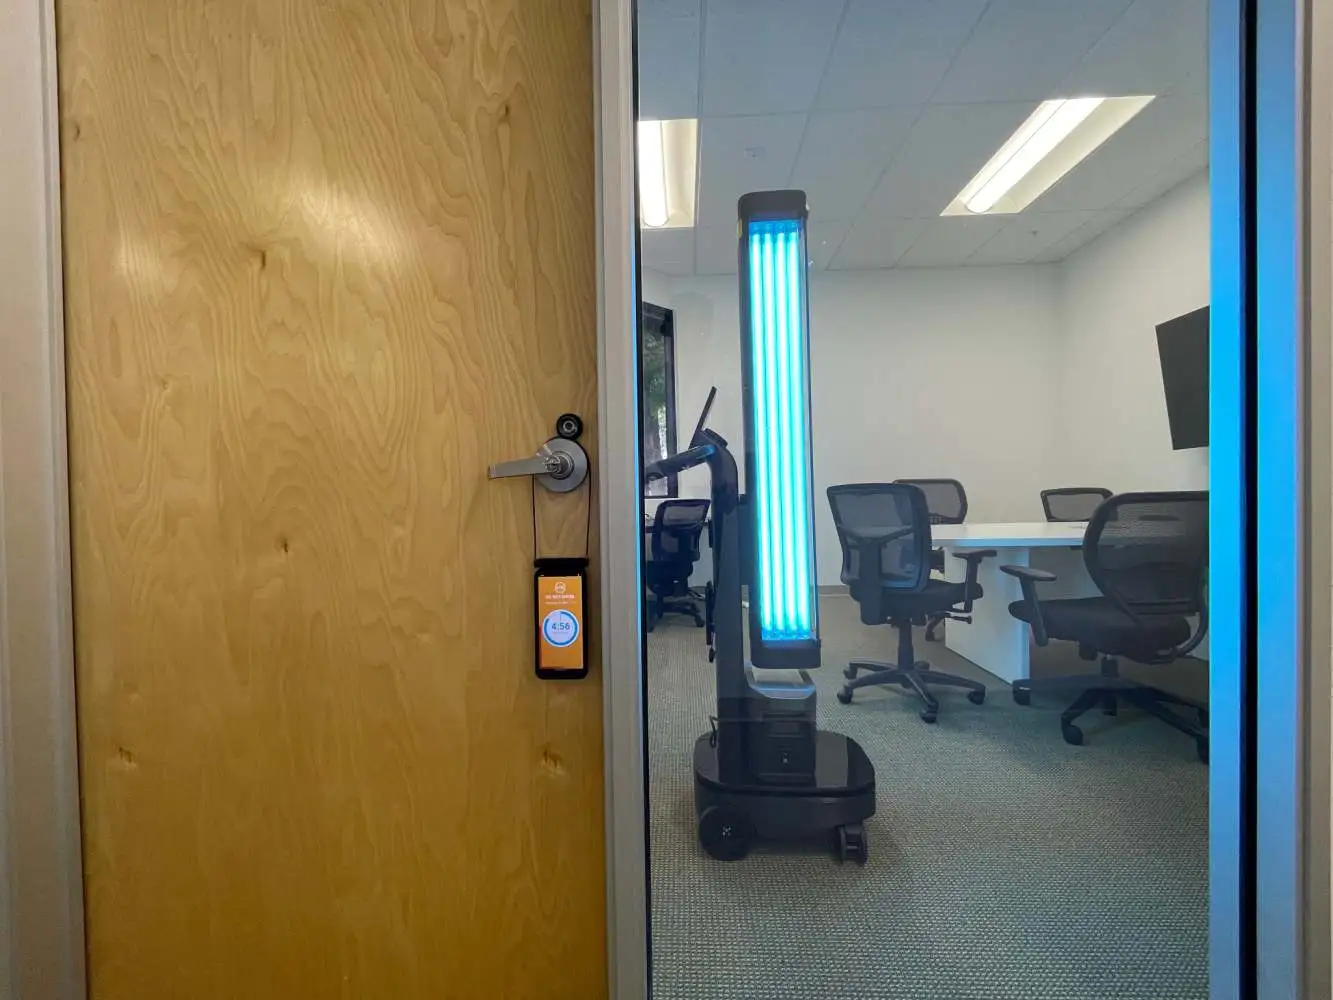 OhmniClean UV-C disinfection robot in an office